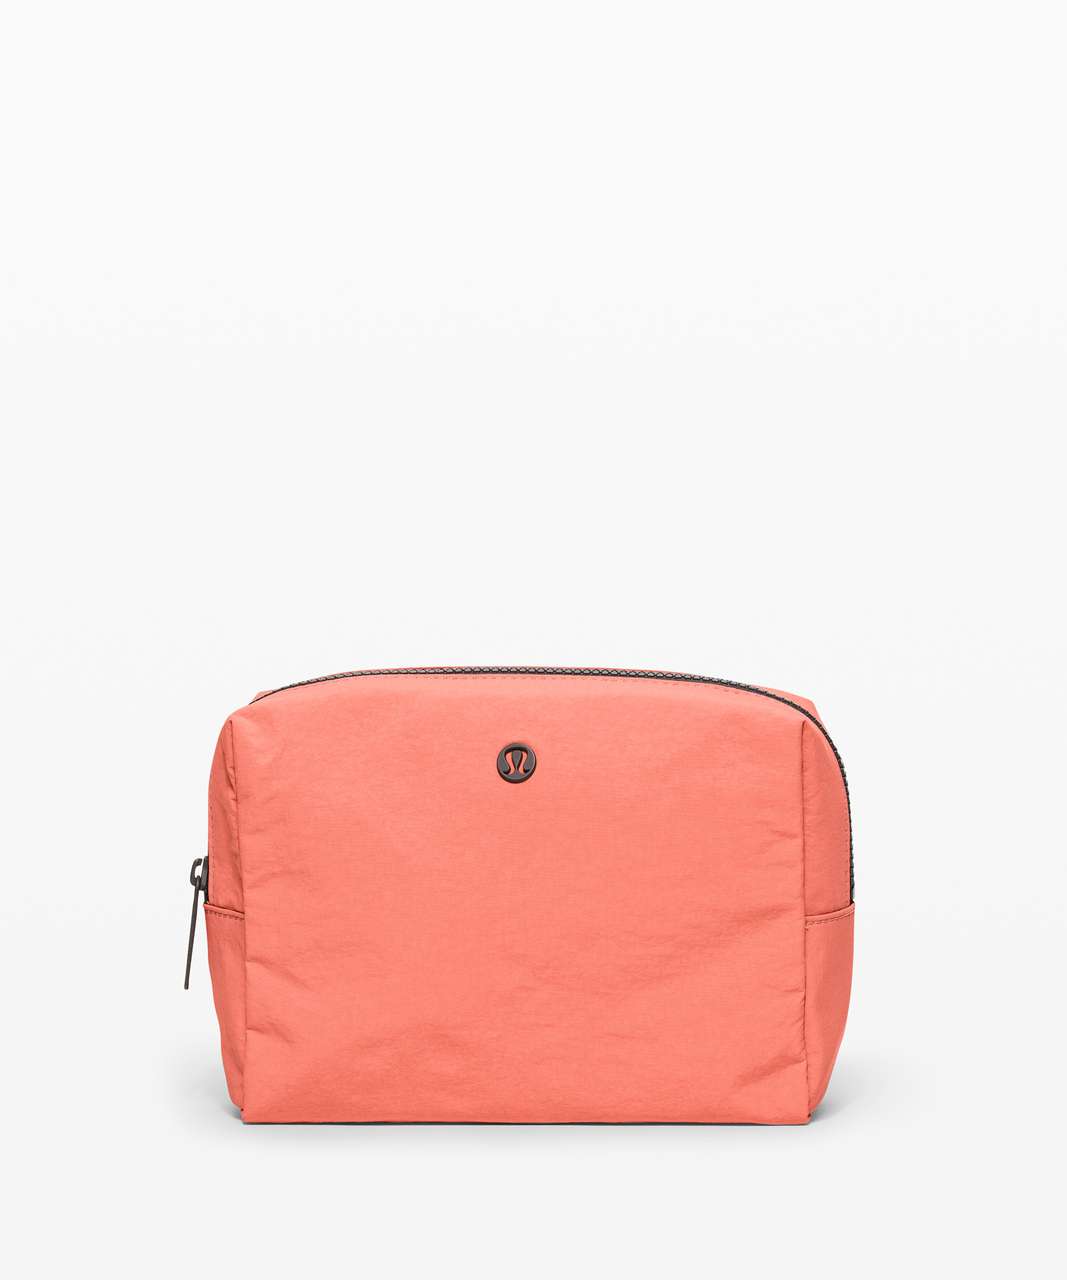 Lululemon All Your Small Things Pouch *4L - Copper Clay